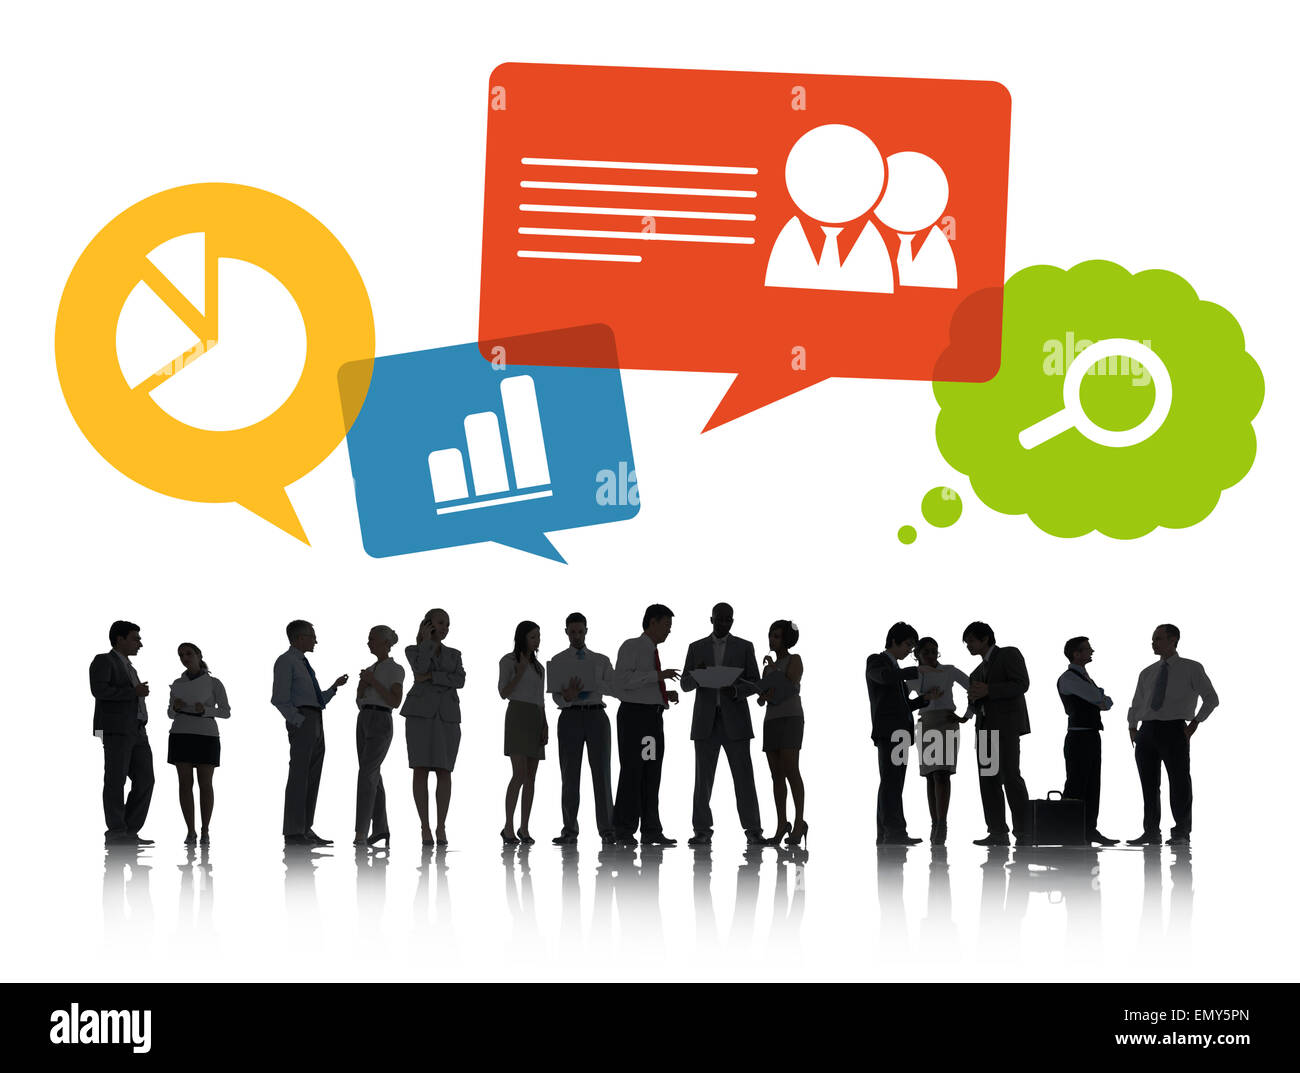 Group of Business People Discussing Social Networking Stock Photo